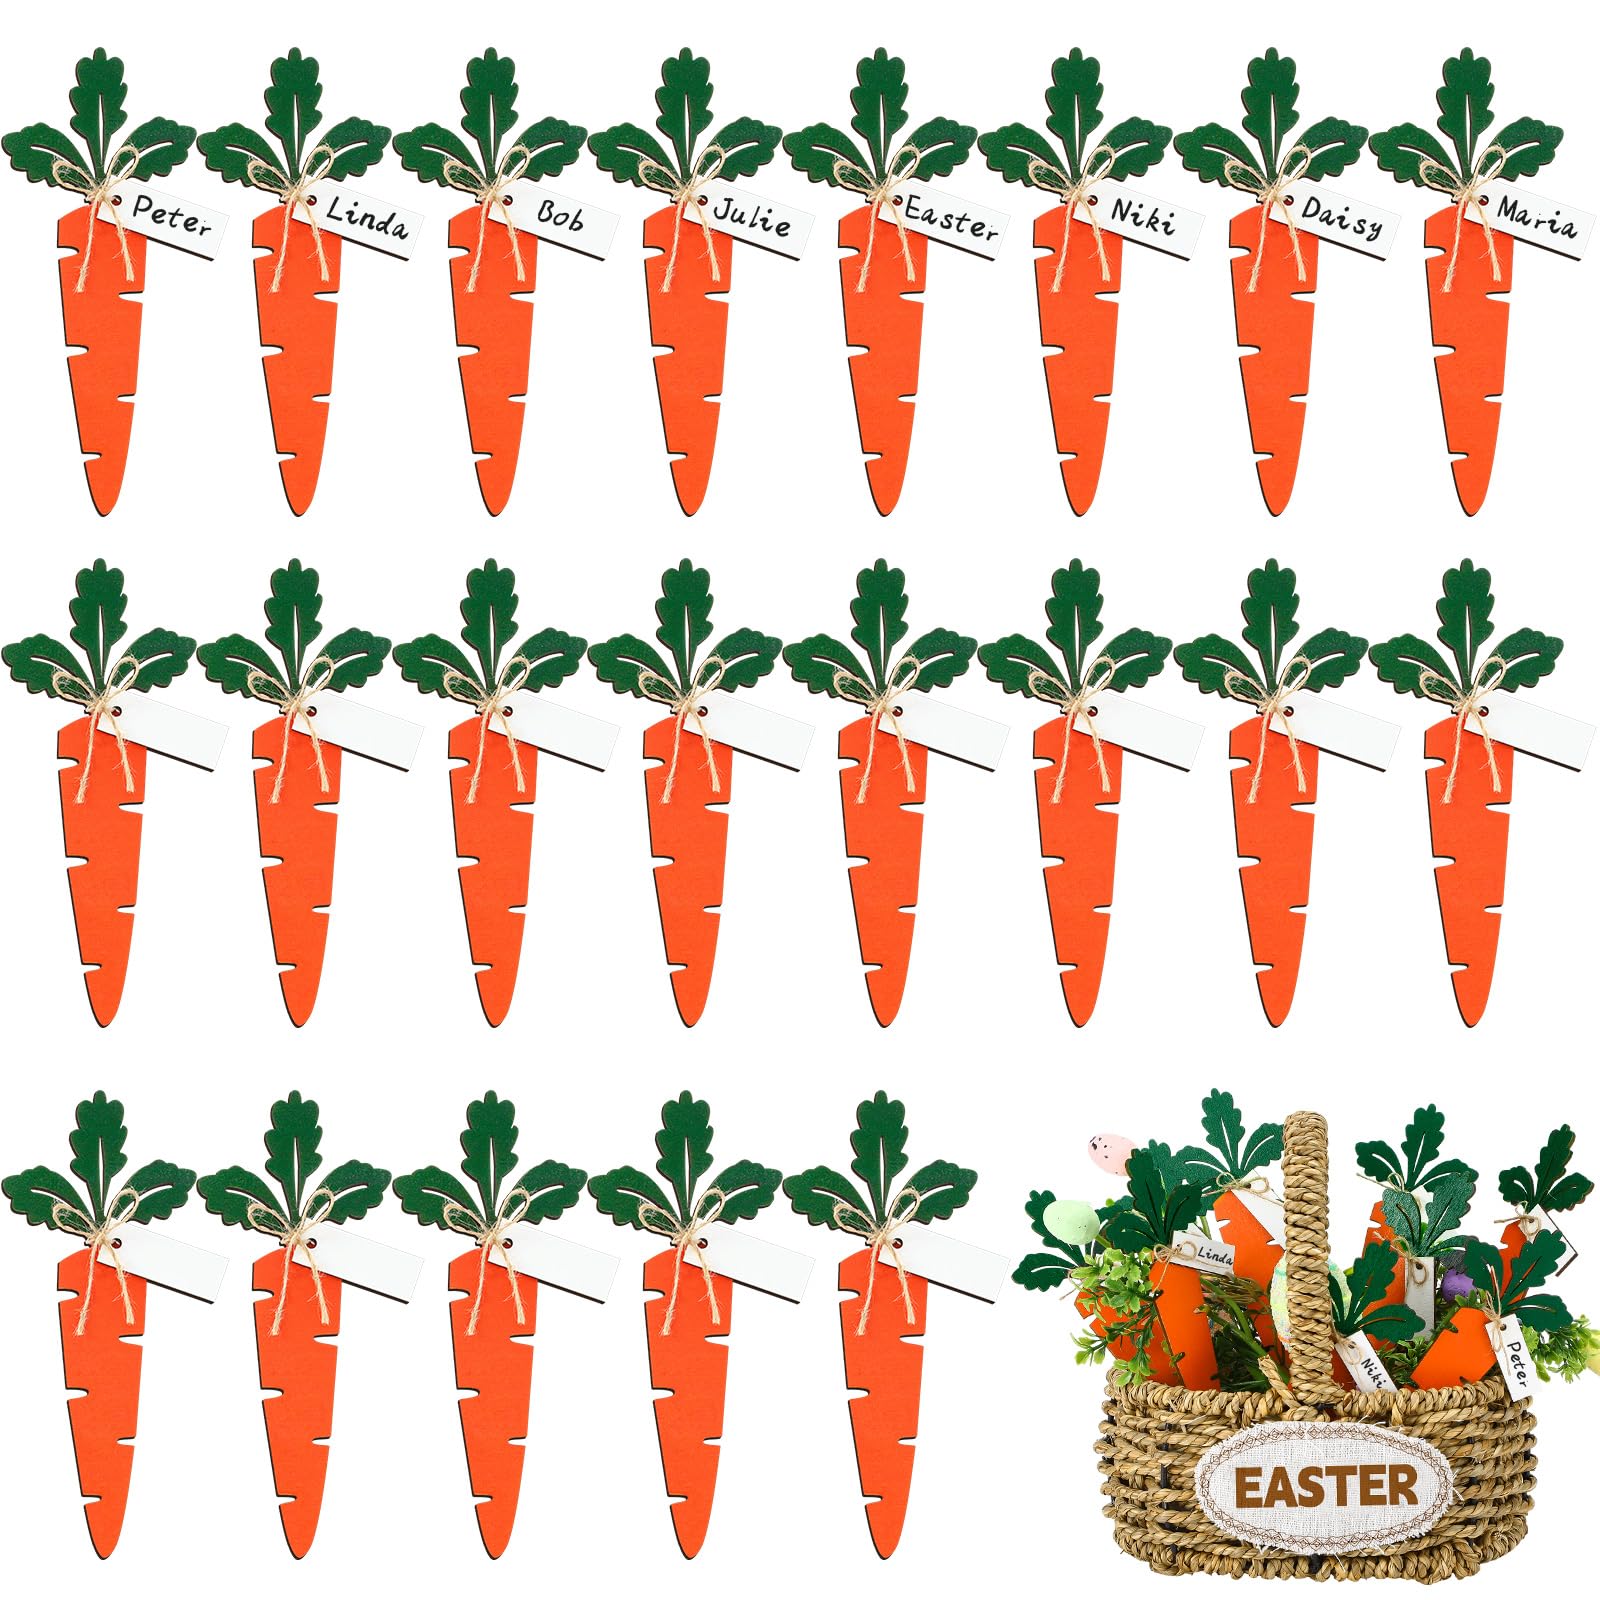 Easter Basket Name Tag Easter Carrot Tags with Twine Personalized Wooden Carrot Blank Sign for Crafts Easter Basket Spring Carrots Decor Hanging Ornaments(24 Pcs)